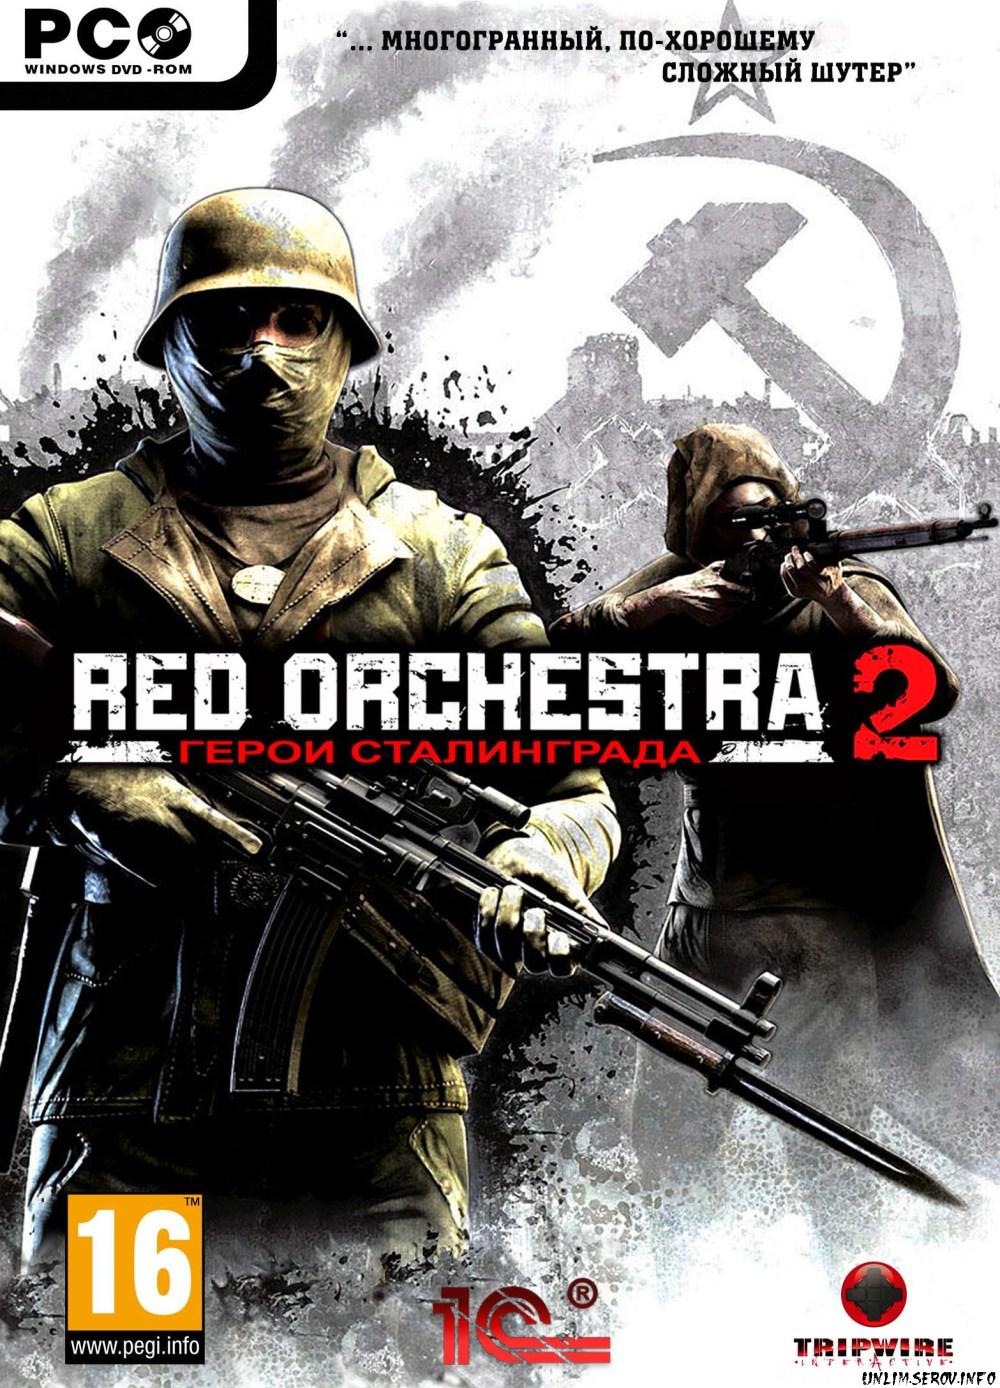 Red Orchestra 2 Heroes of Stalingrad / Red Orchestra 2 Героев Сталинграда